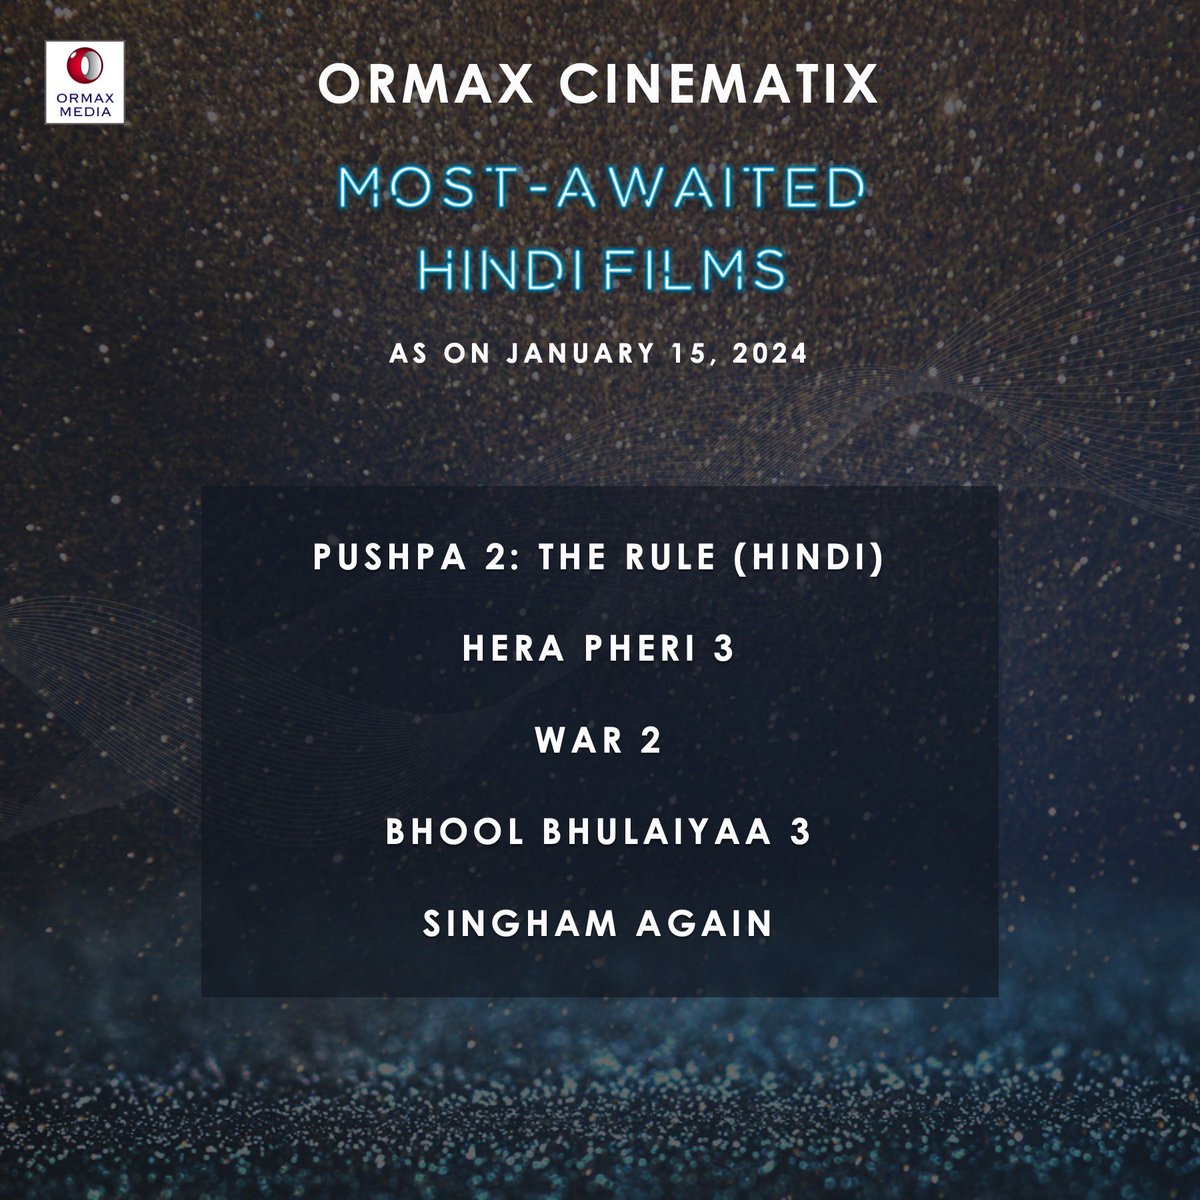 #OrmaxCinematix Most-awaited Hindi films, as on Jan 15, 2024 (only films releasing Mar 2024 onwards whose trailer has not released yet have been considered)